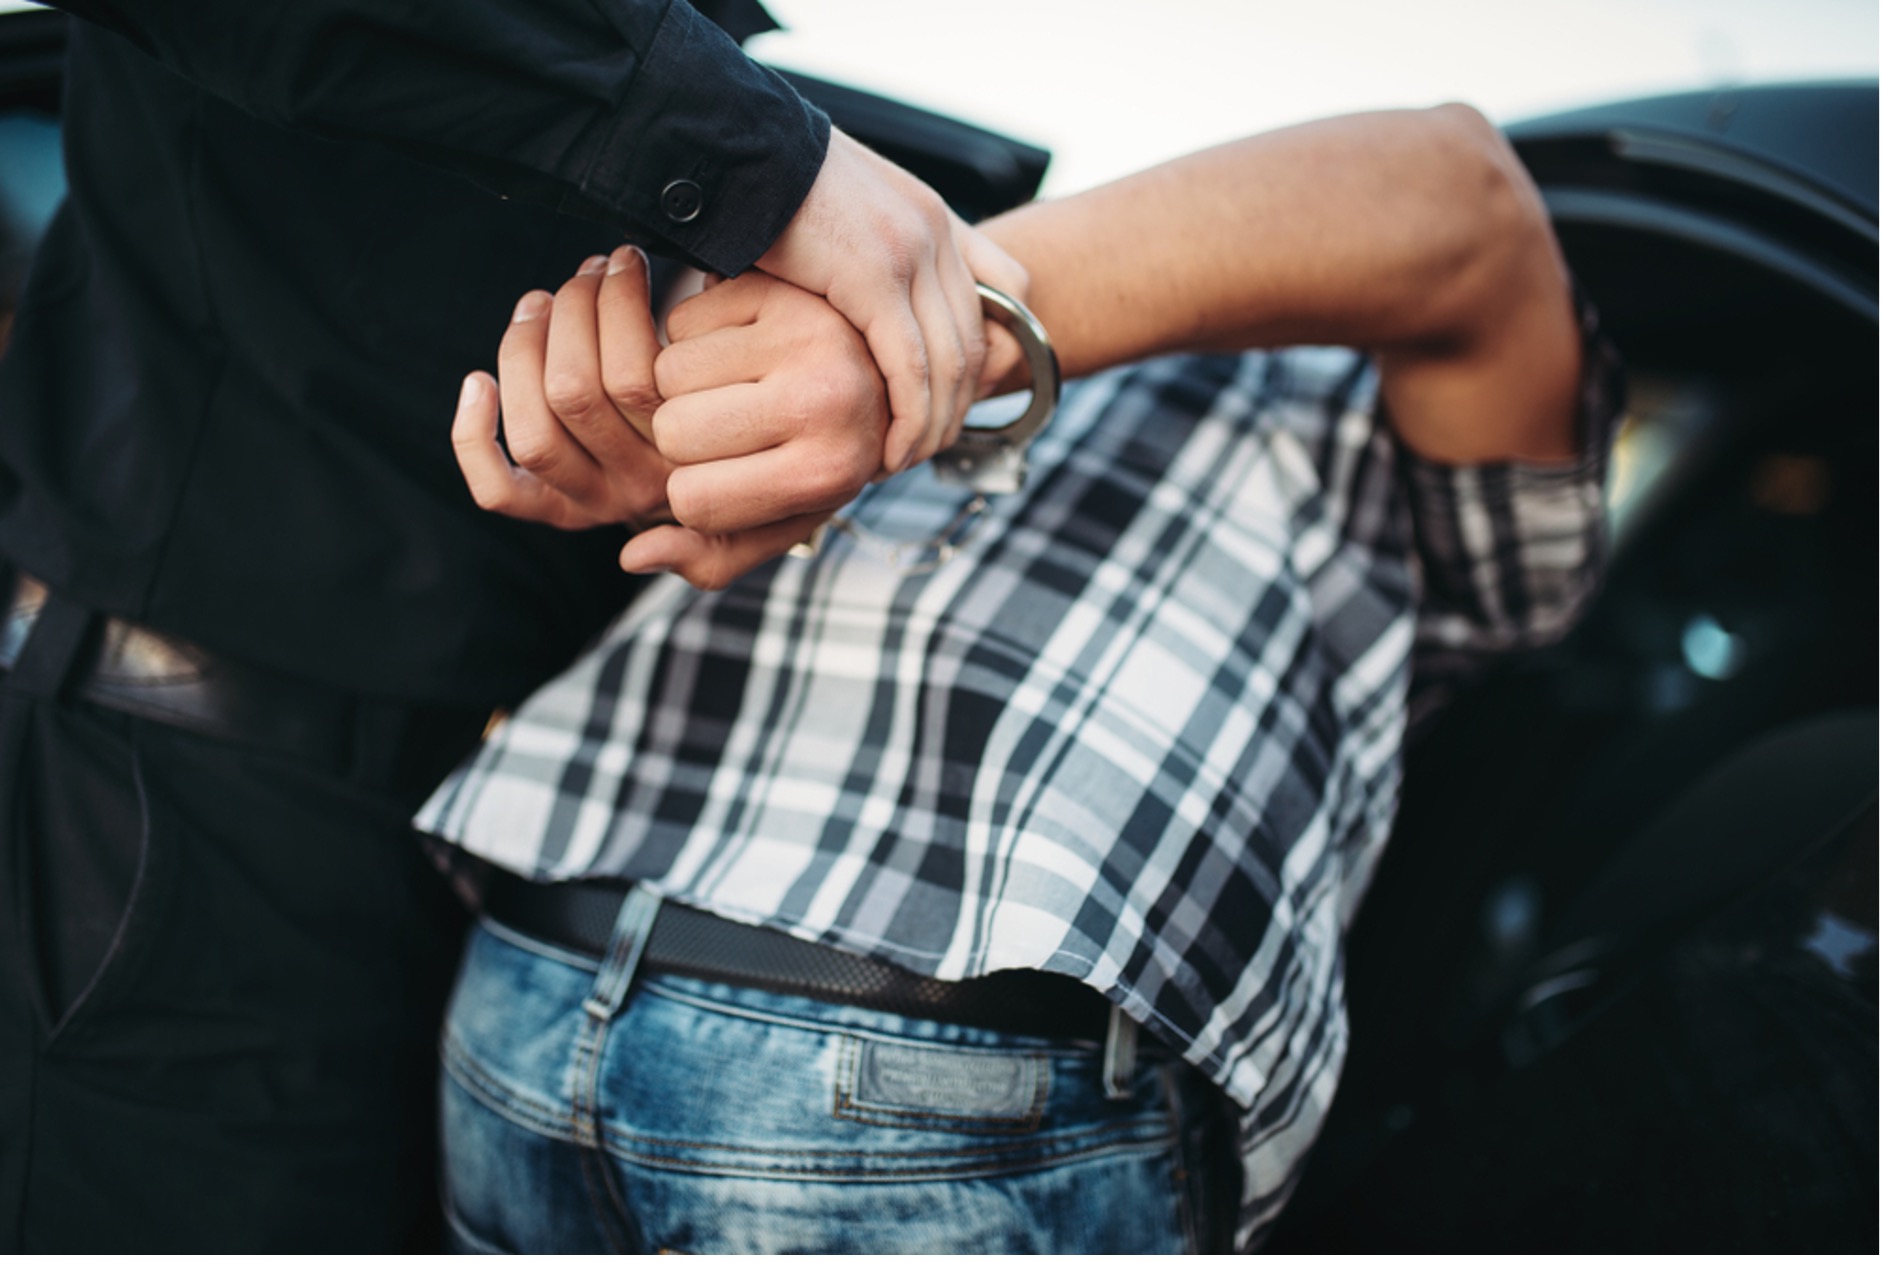 Colour image of a man wearing handcuffs being arrested and placed in the back of a police car by a police officer